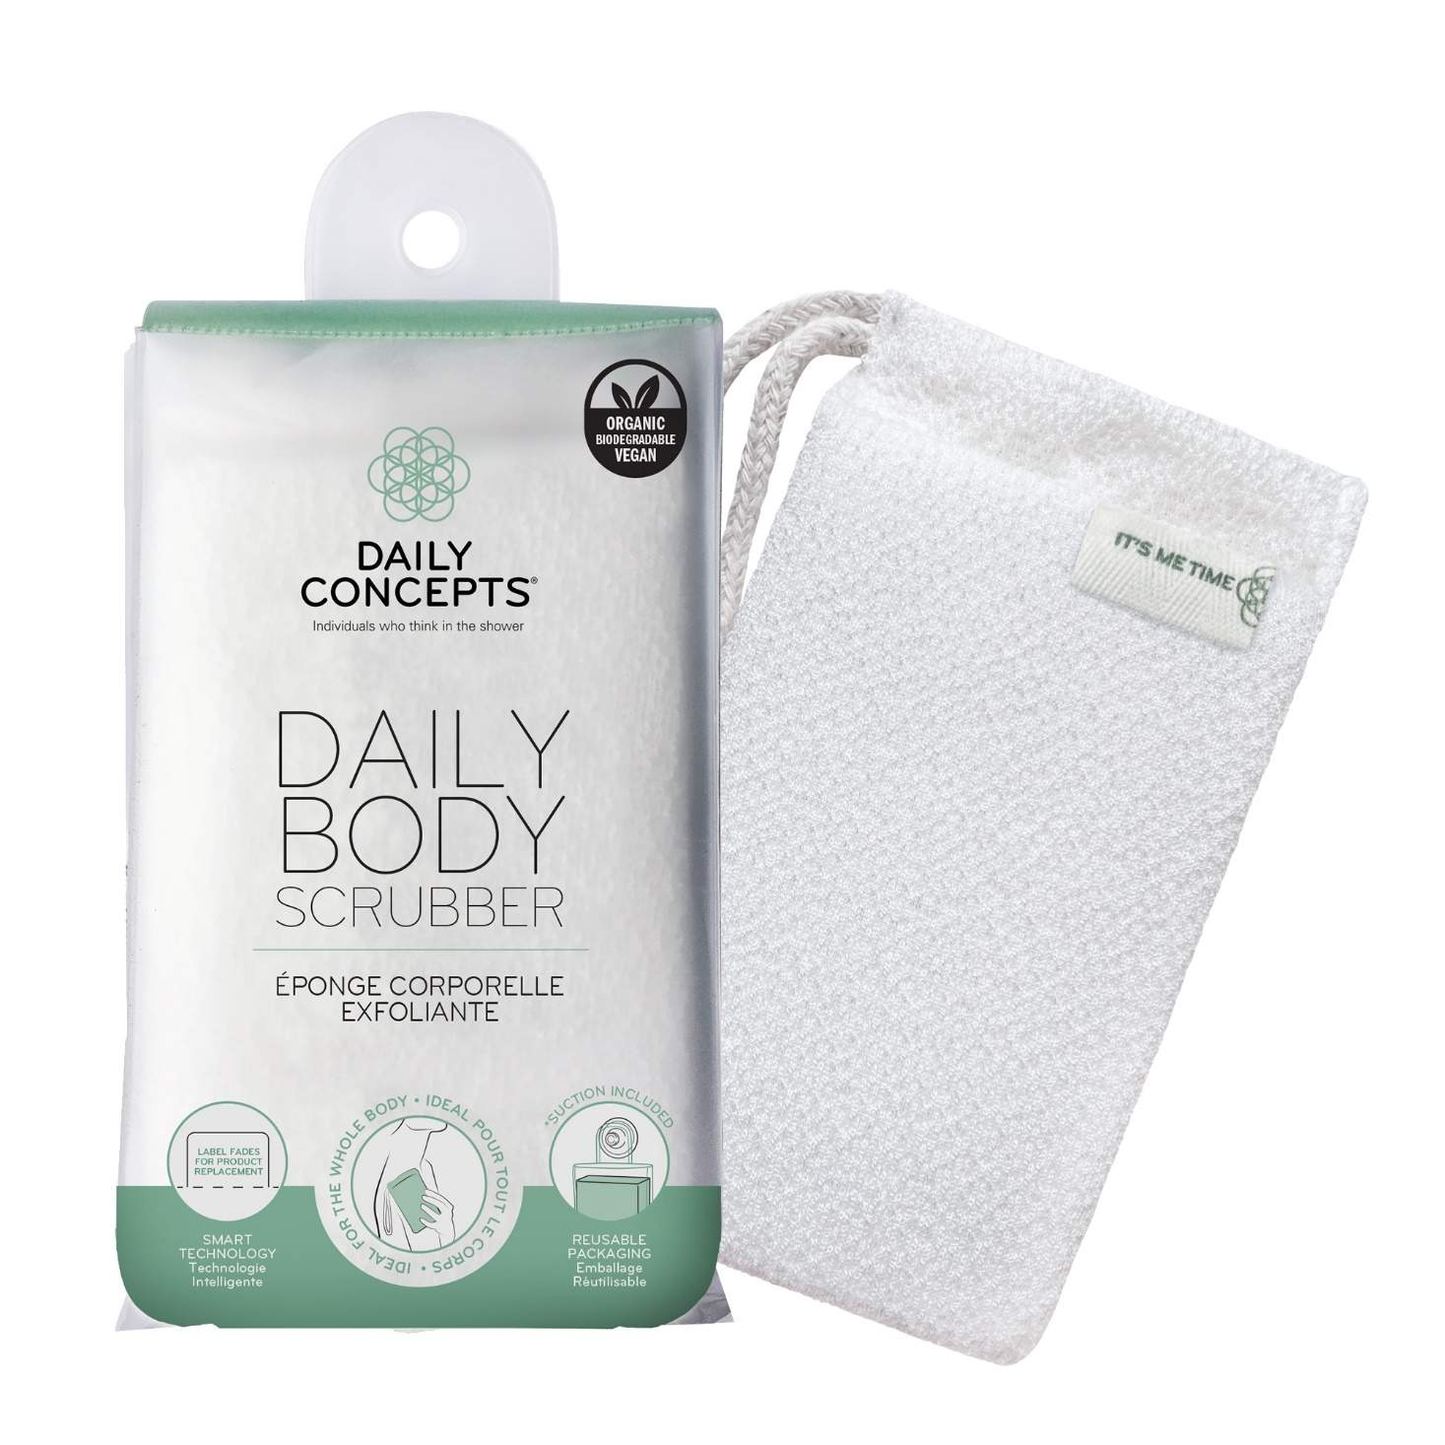 Daily Concepts Your Body Scrubber